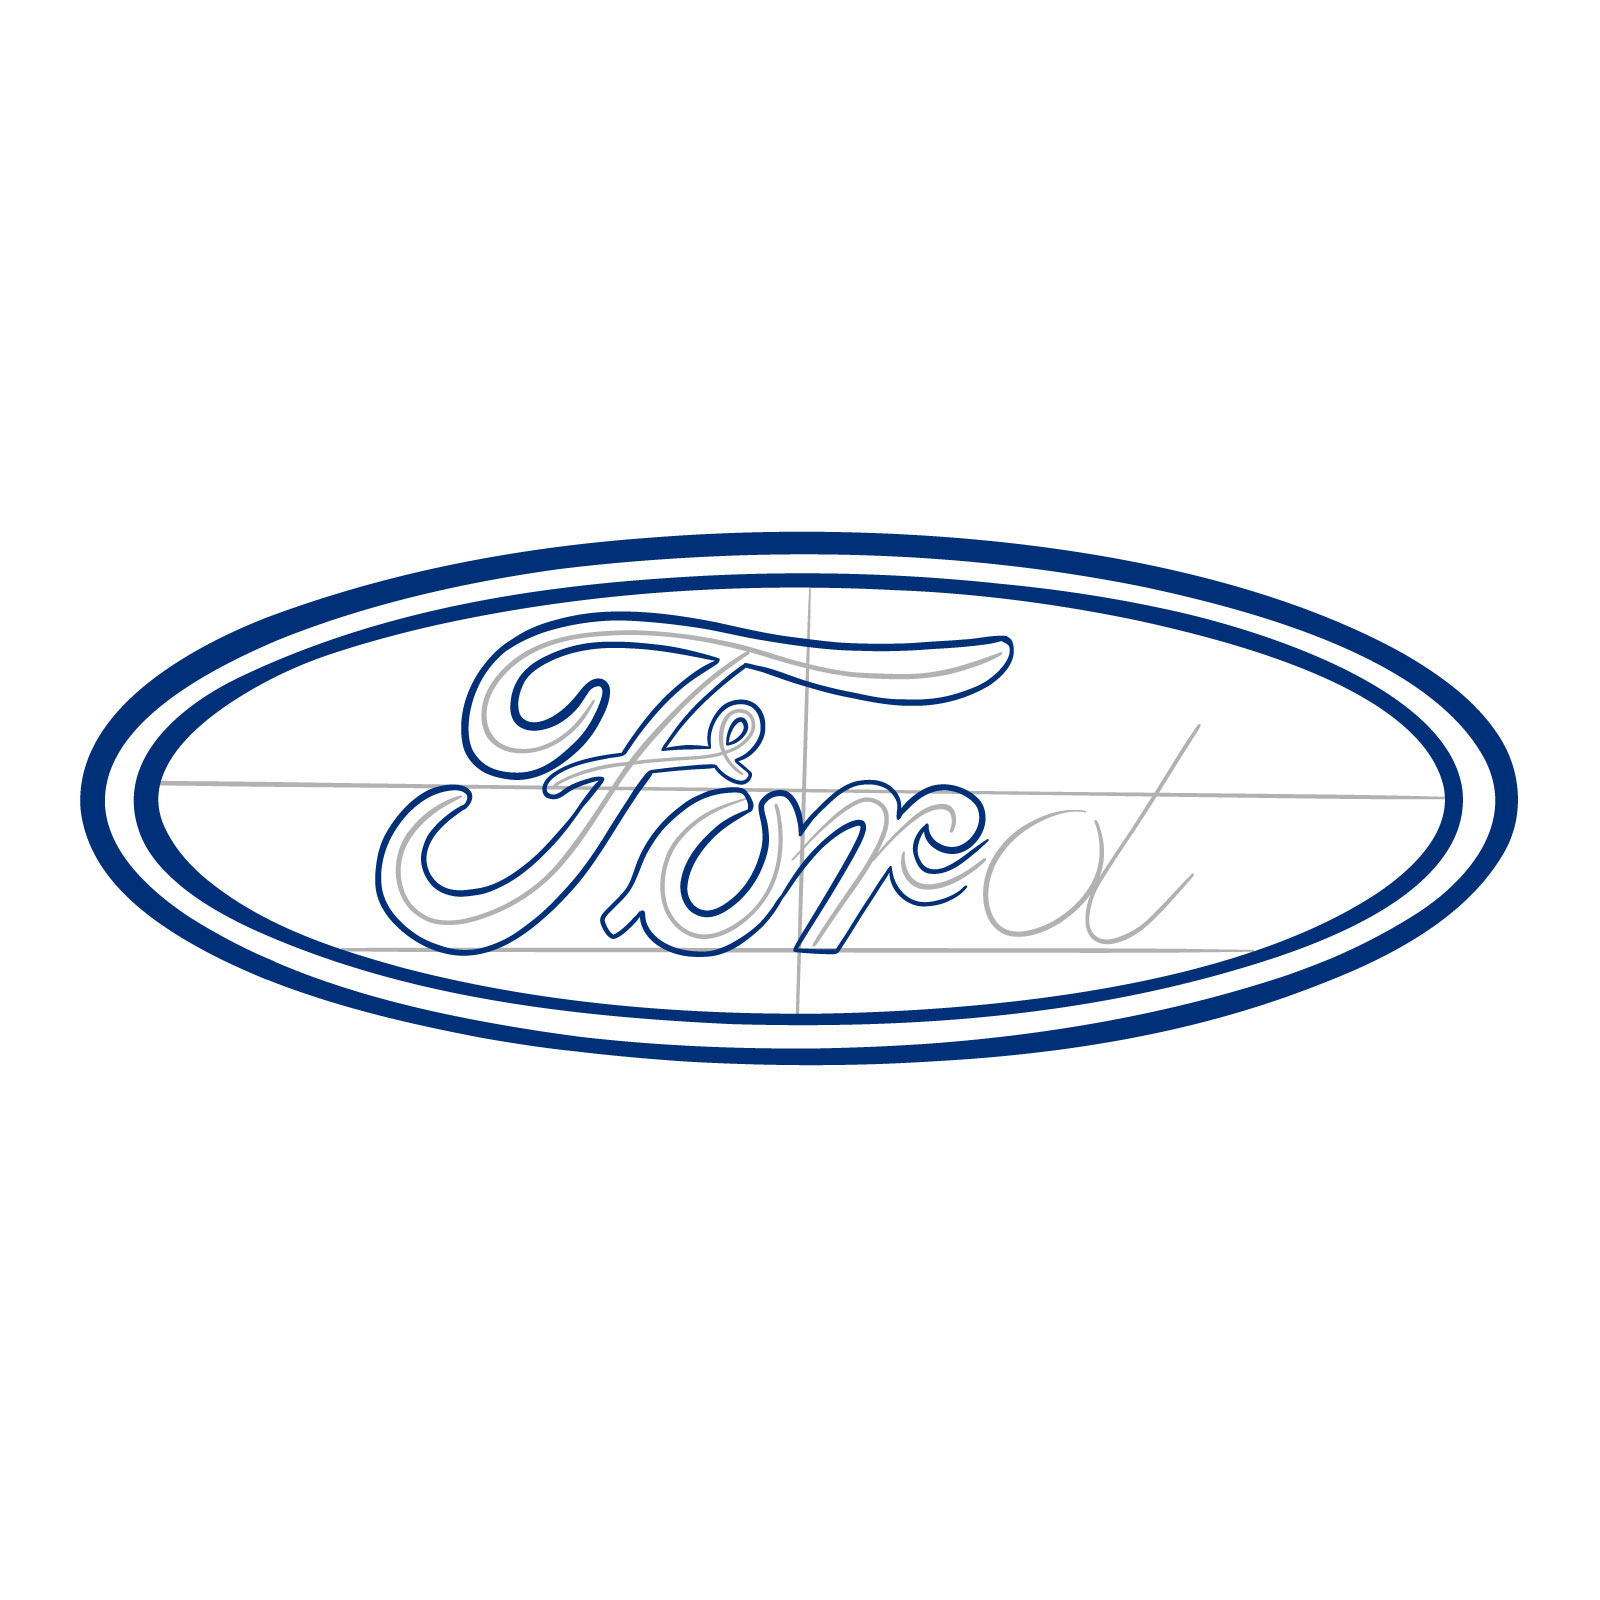 How to draw the Ford logo - step 11